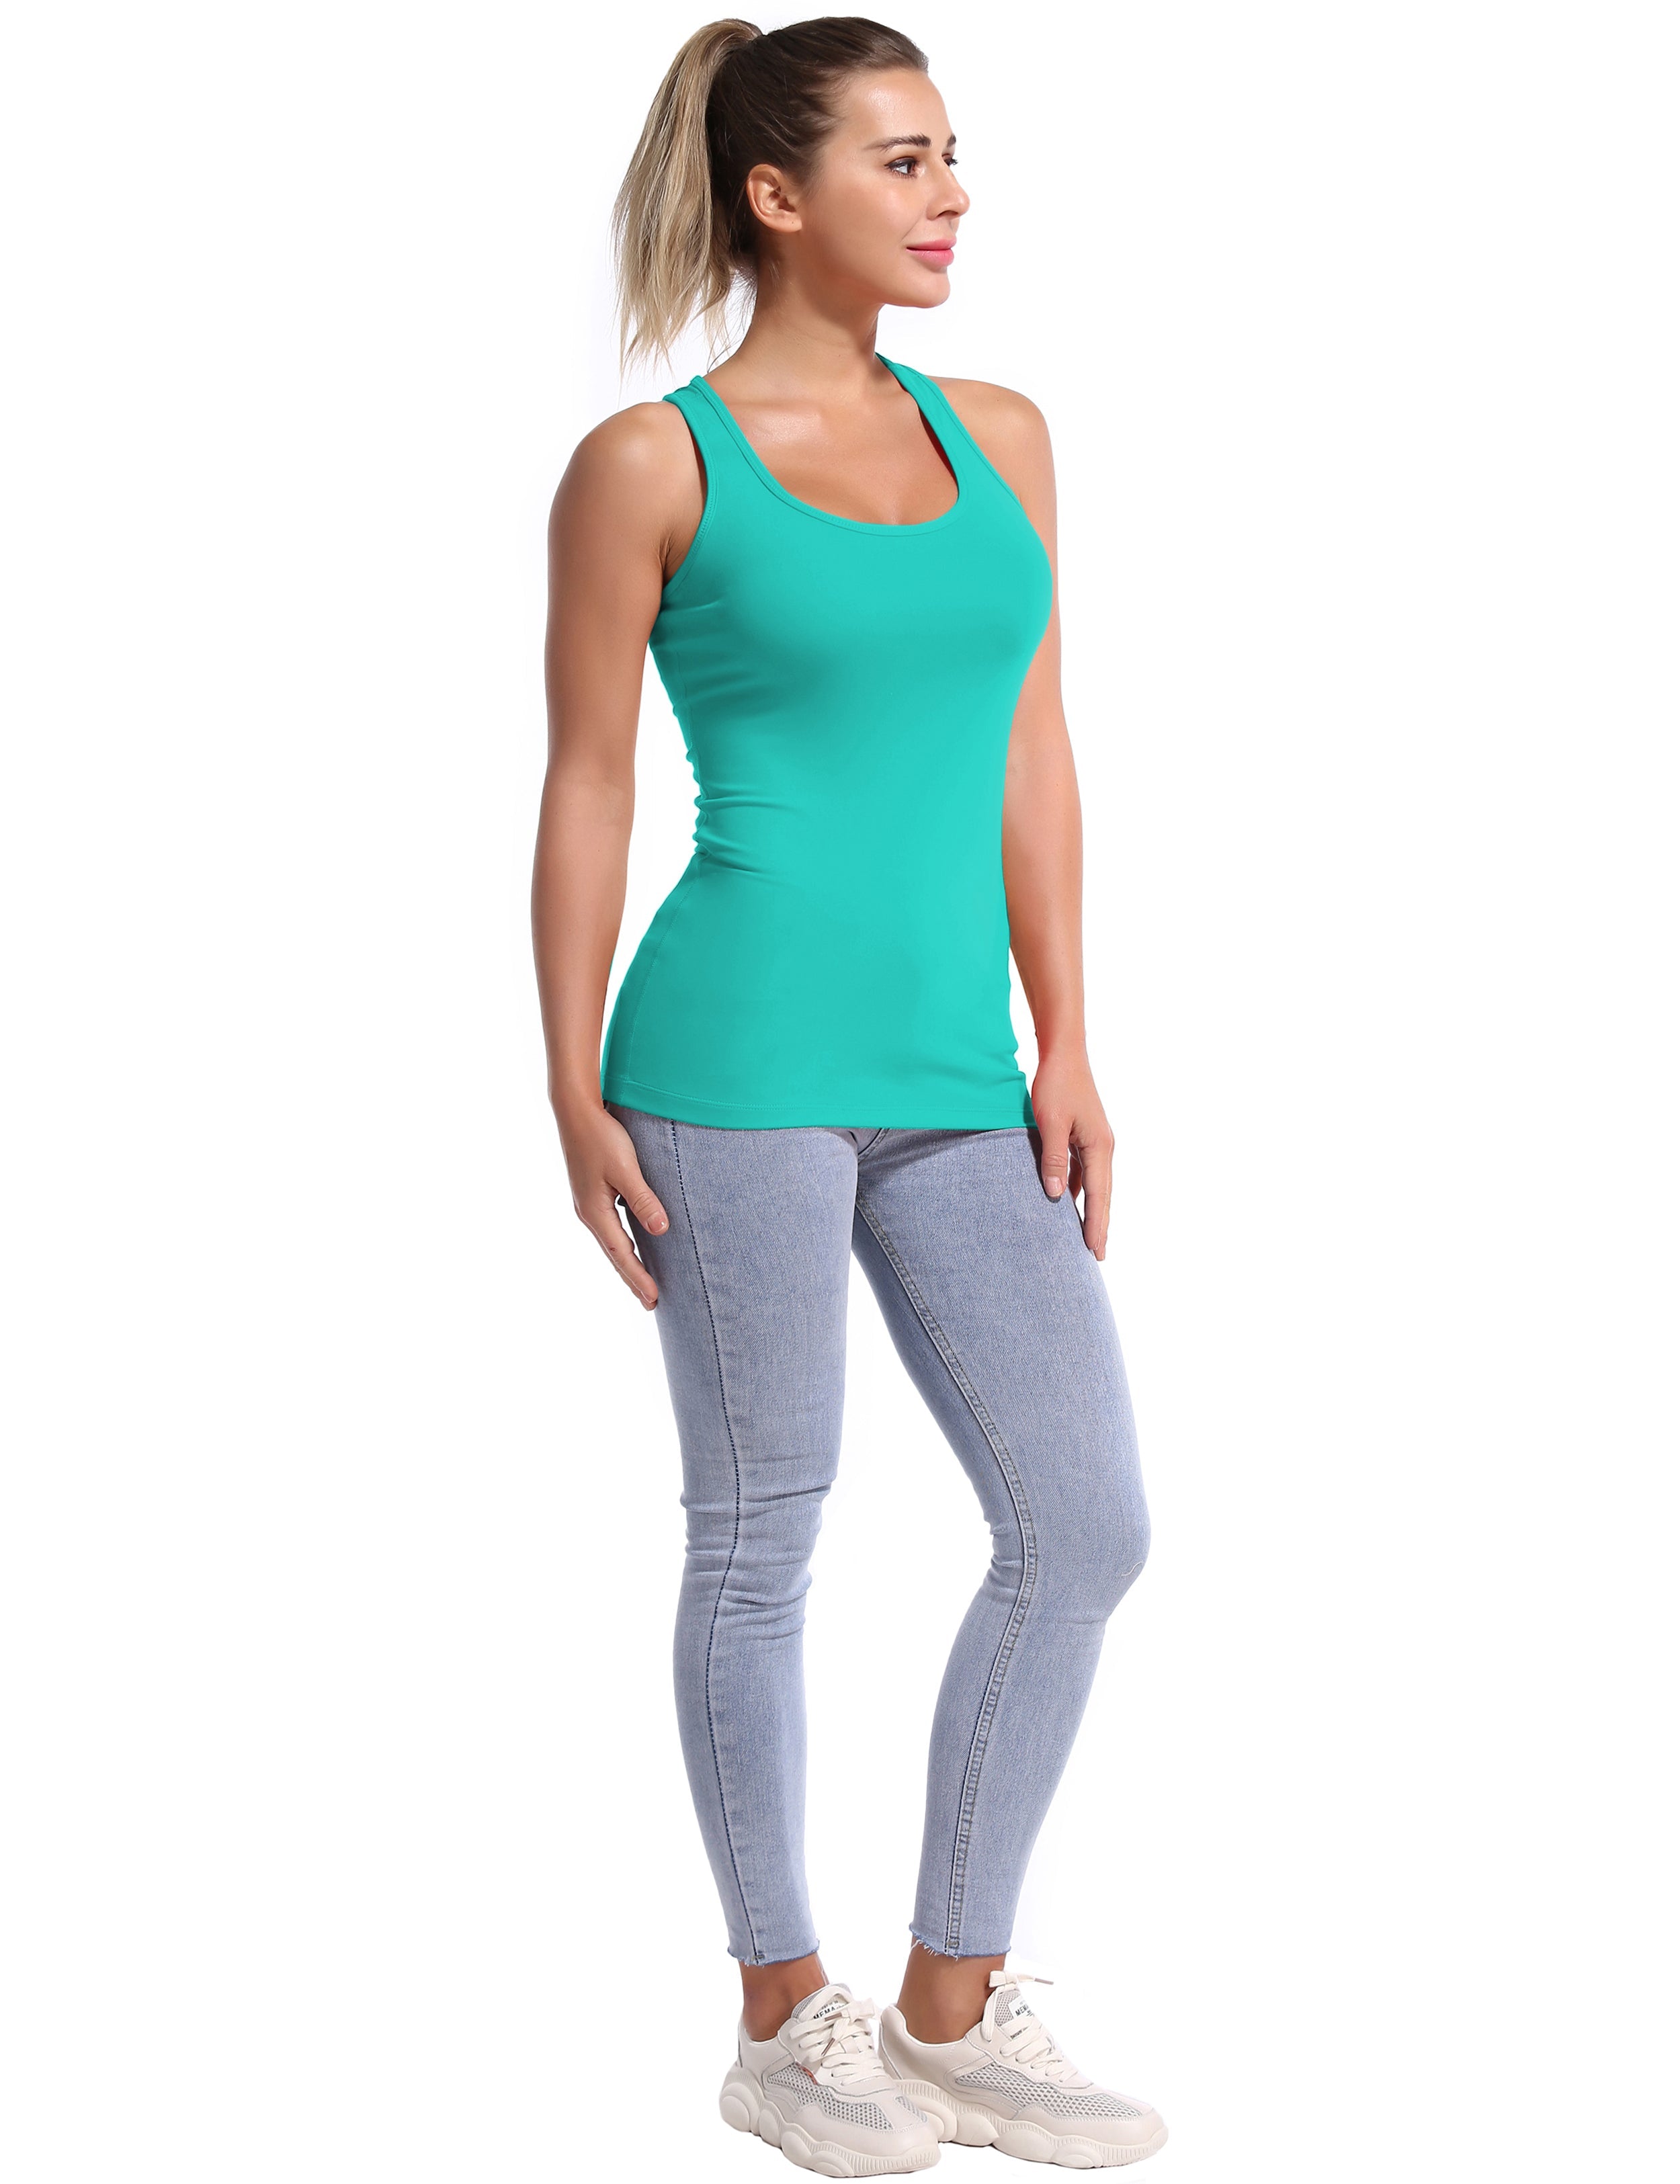 Racerback Athletic Tank Tops cyan 92%Nylon/8%Spandex(Cotton Soft) Designed for Yoga Tight Fit So buttery soft, it feels weightless Sweat-wicking Four-way stretch Breathable Contours your body Sits below the waistband for moderate, everyday coverage